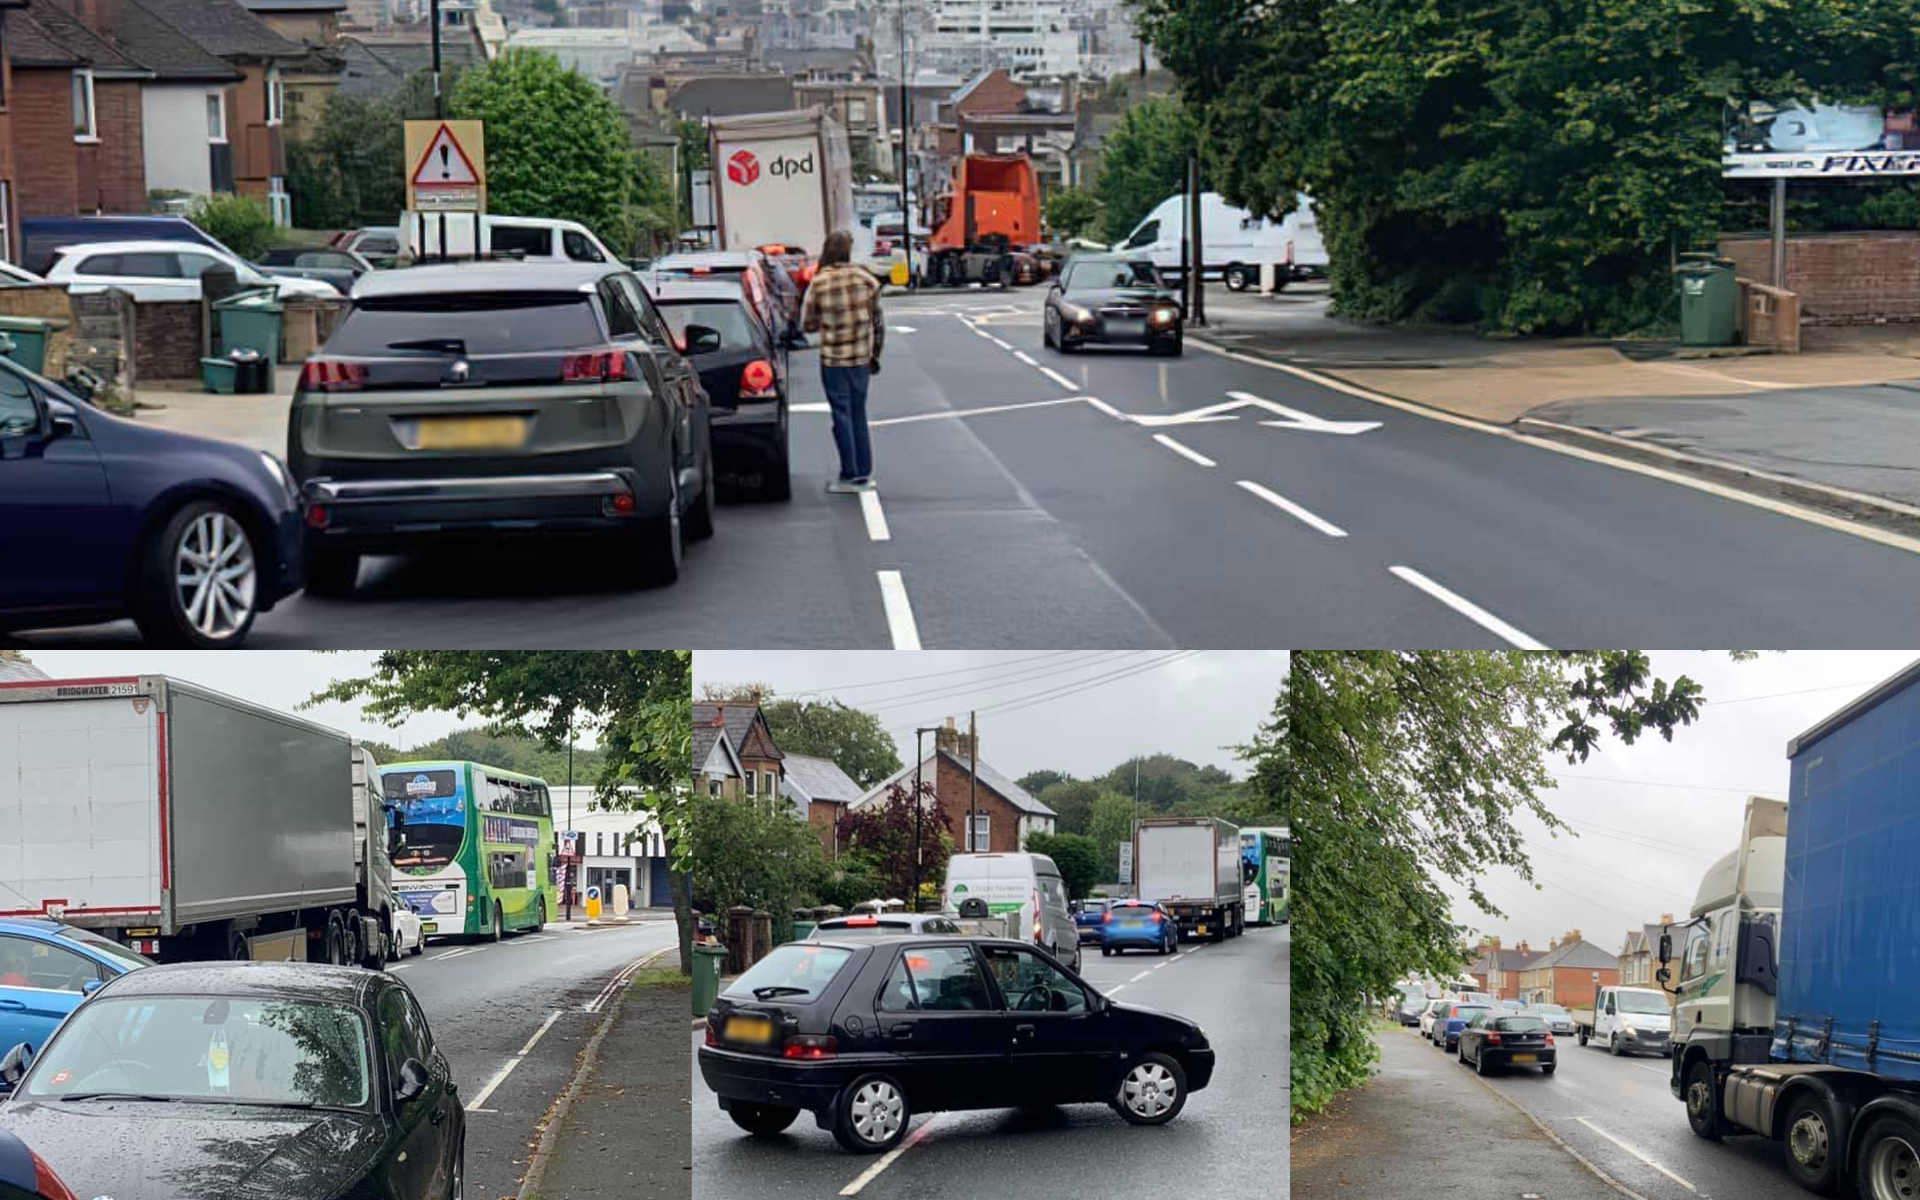 Montage of photos of the east cowes gridlock on the roads